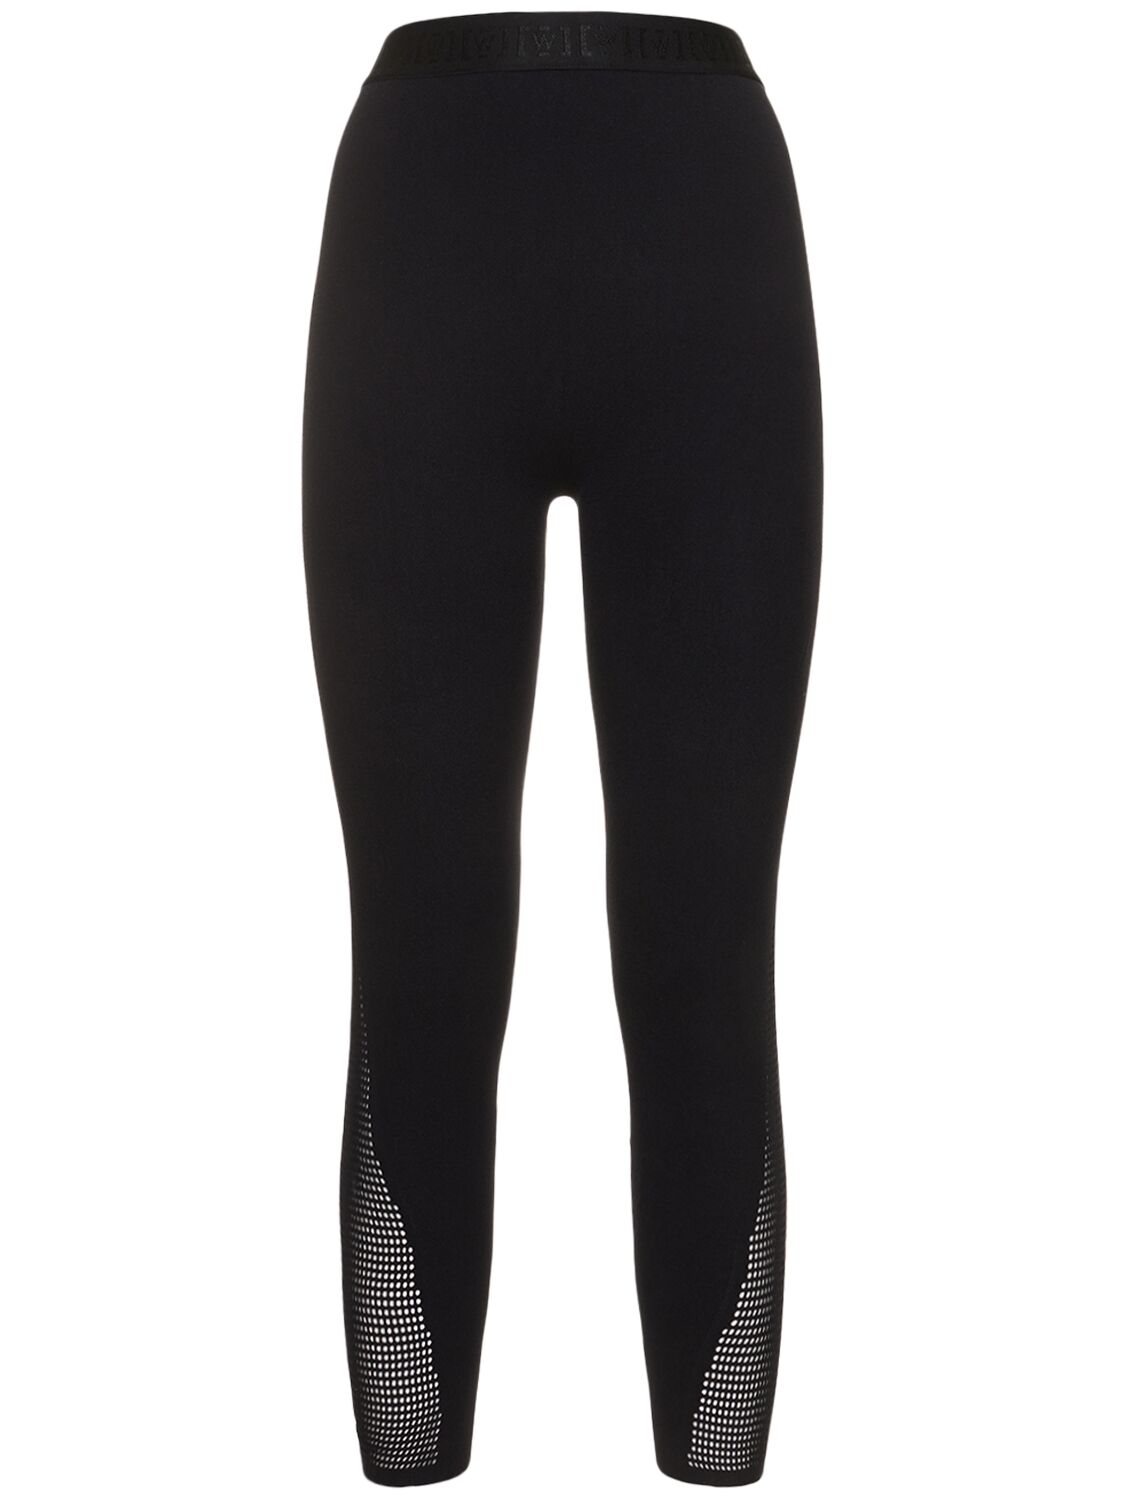 Black Mugler Edition Shaping Leggings by Wolford on Sale